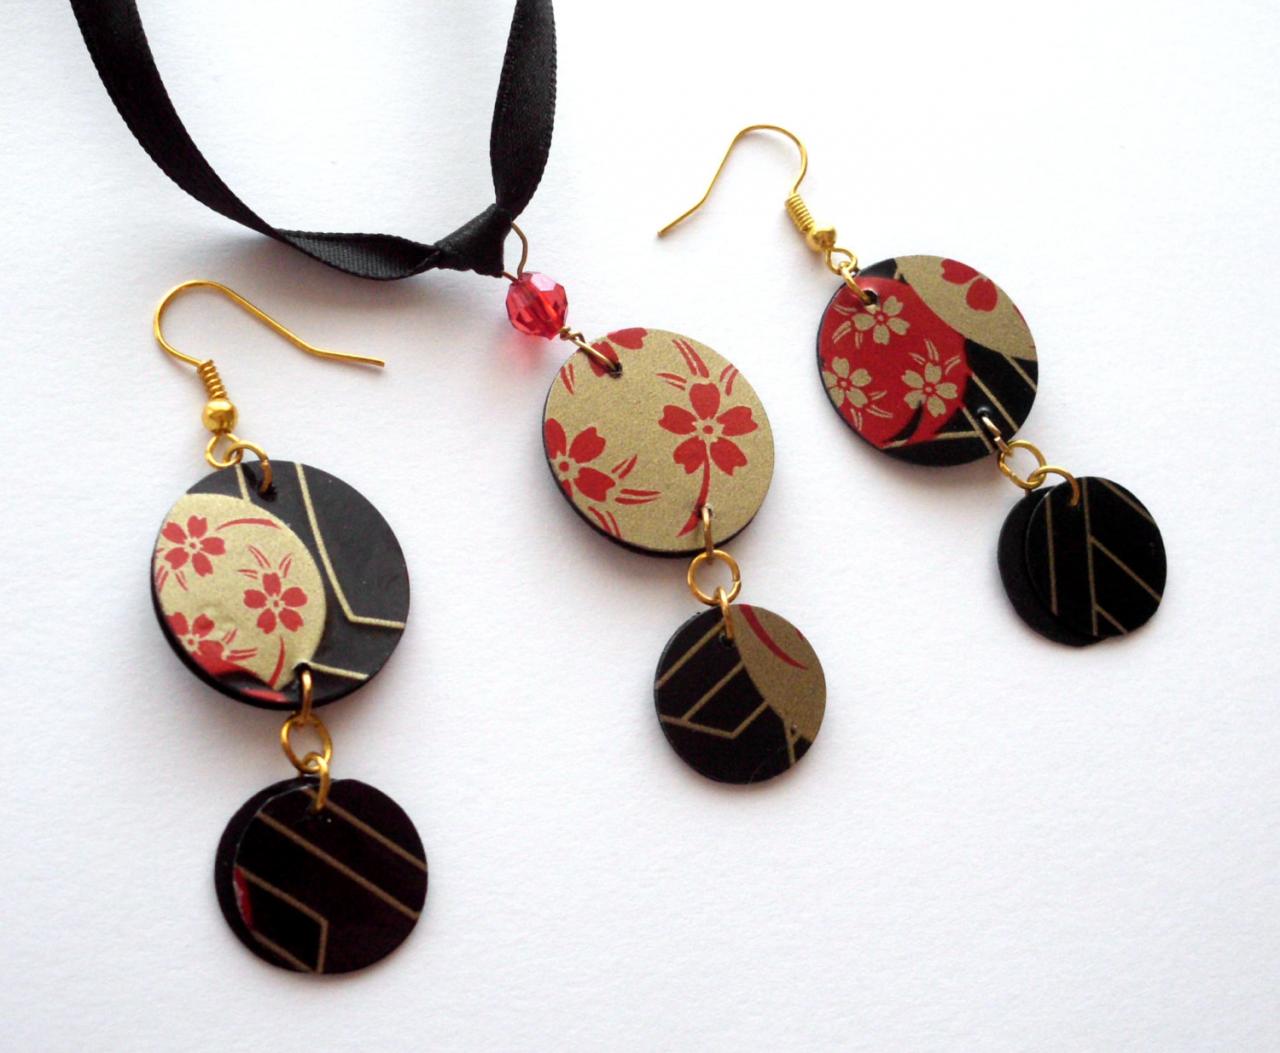 Japanese Jewelry Set Handmade Of Recycled Plastic Sushi Plate Oriental Floral Pattern Black Red Gold Gothic, Upcycled Jewelry, Recycled,